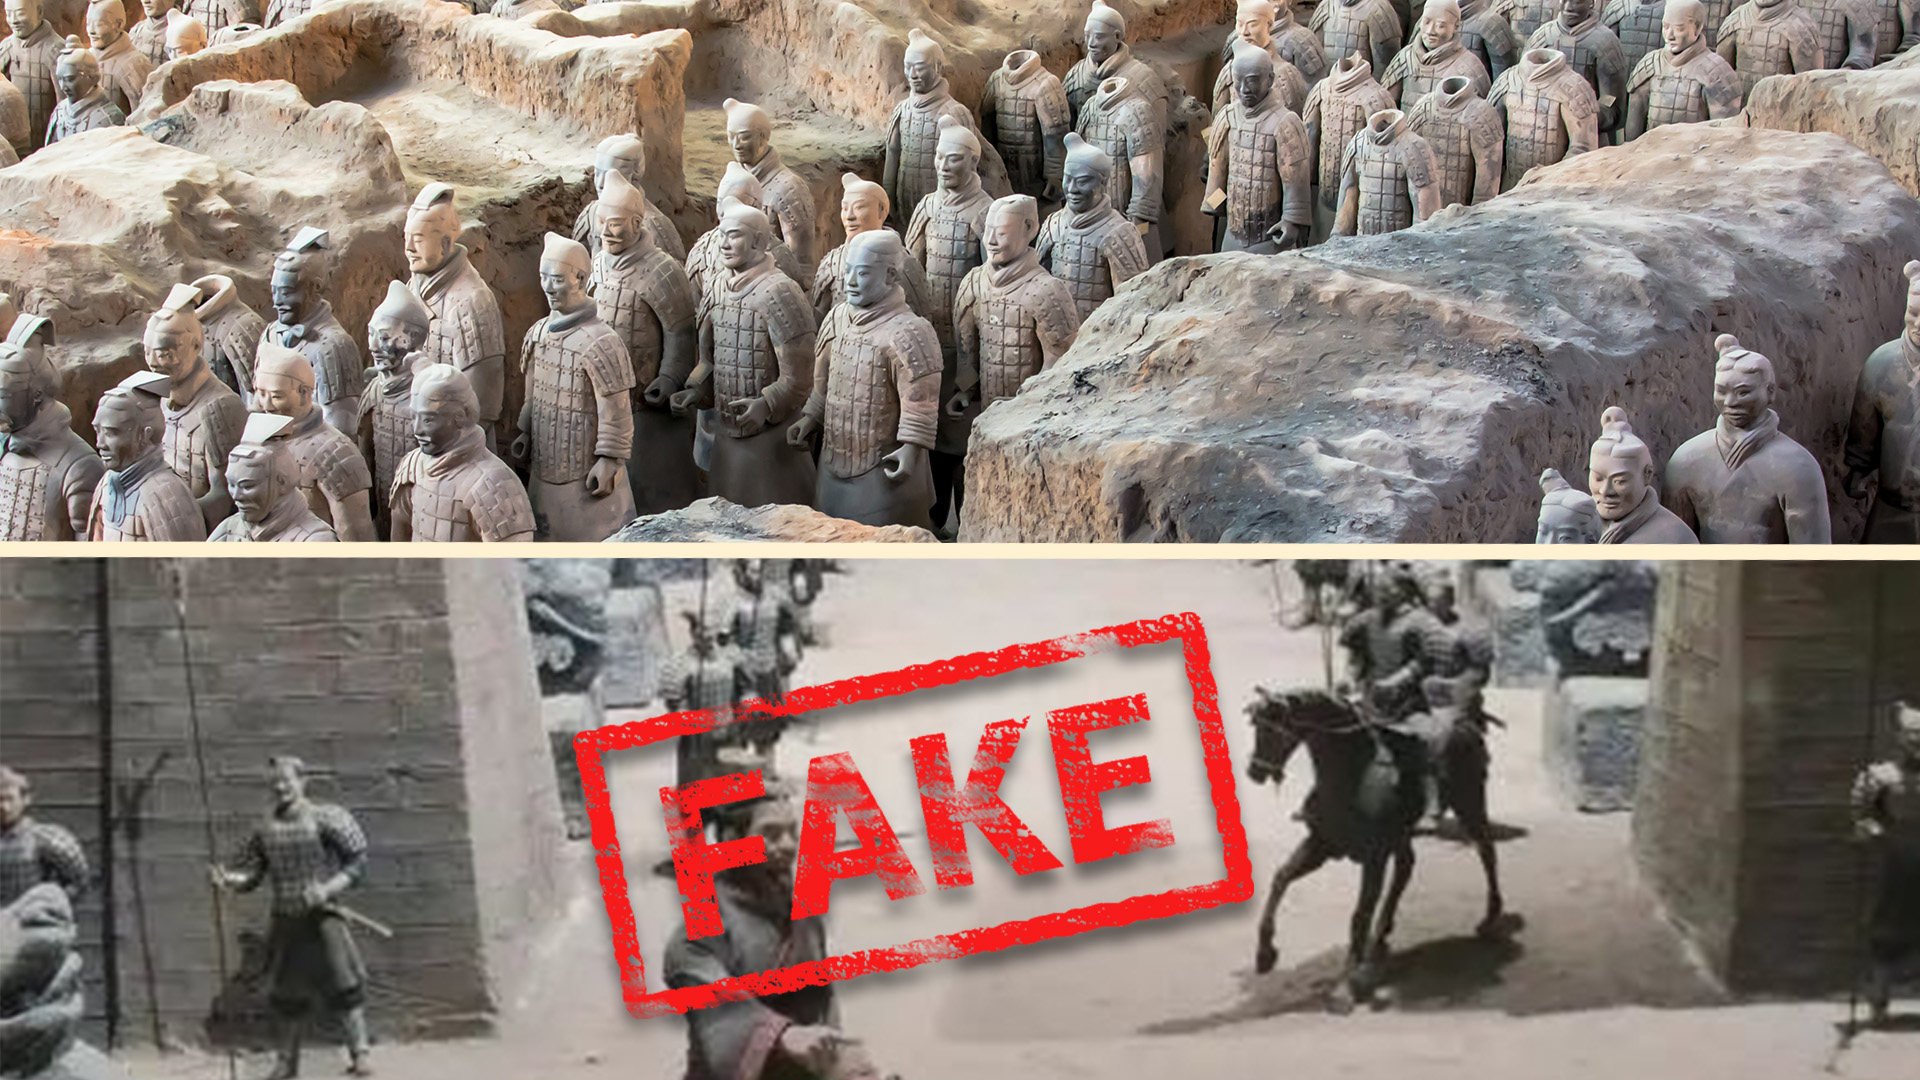 The emergence of a fake Terracotta Army site in China has sparked outrage on mainland social media. Photo: SCMP composite/Shutterstock/Weibo